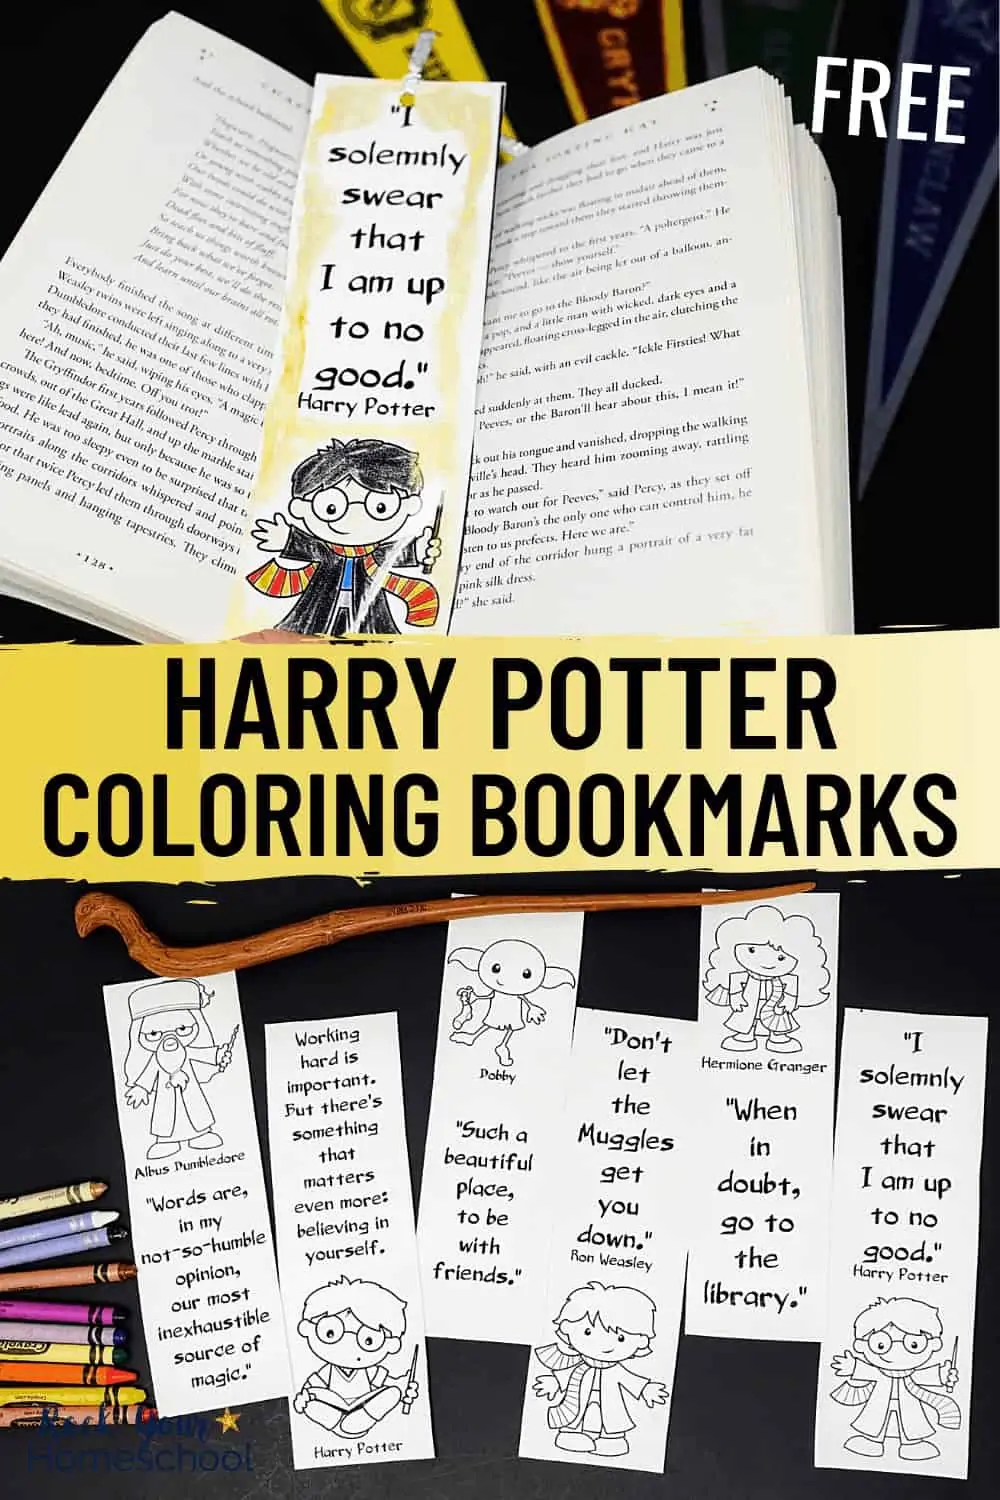 Free Harry Potter-Inspired Coloring Bookmarks for Super Fun Activities for All